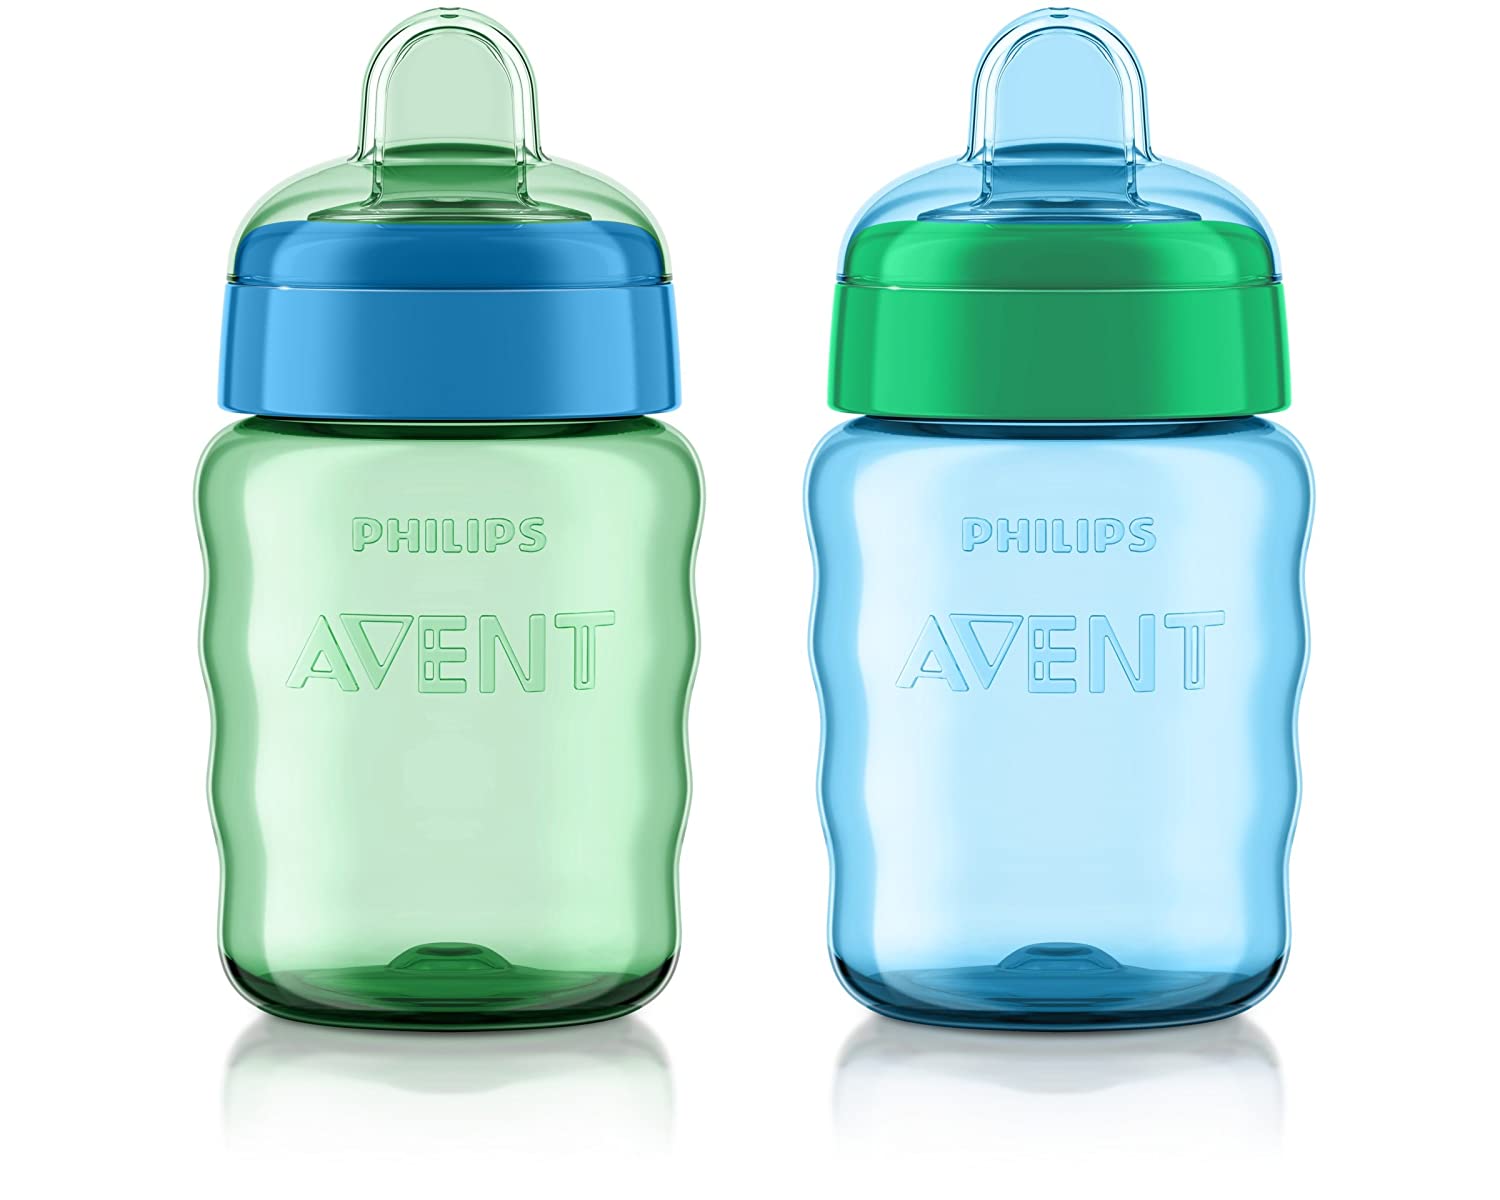 AVENT MY EASY SIP SUP 9OZ